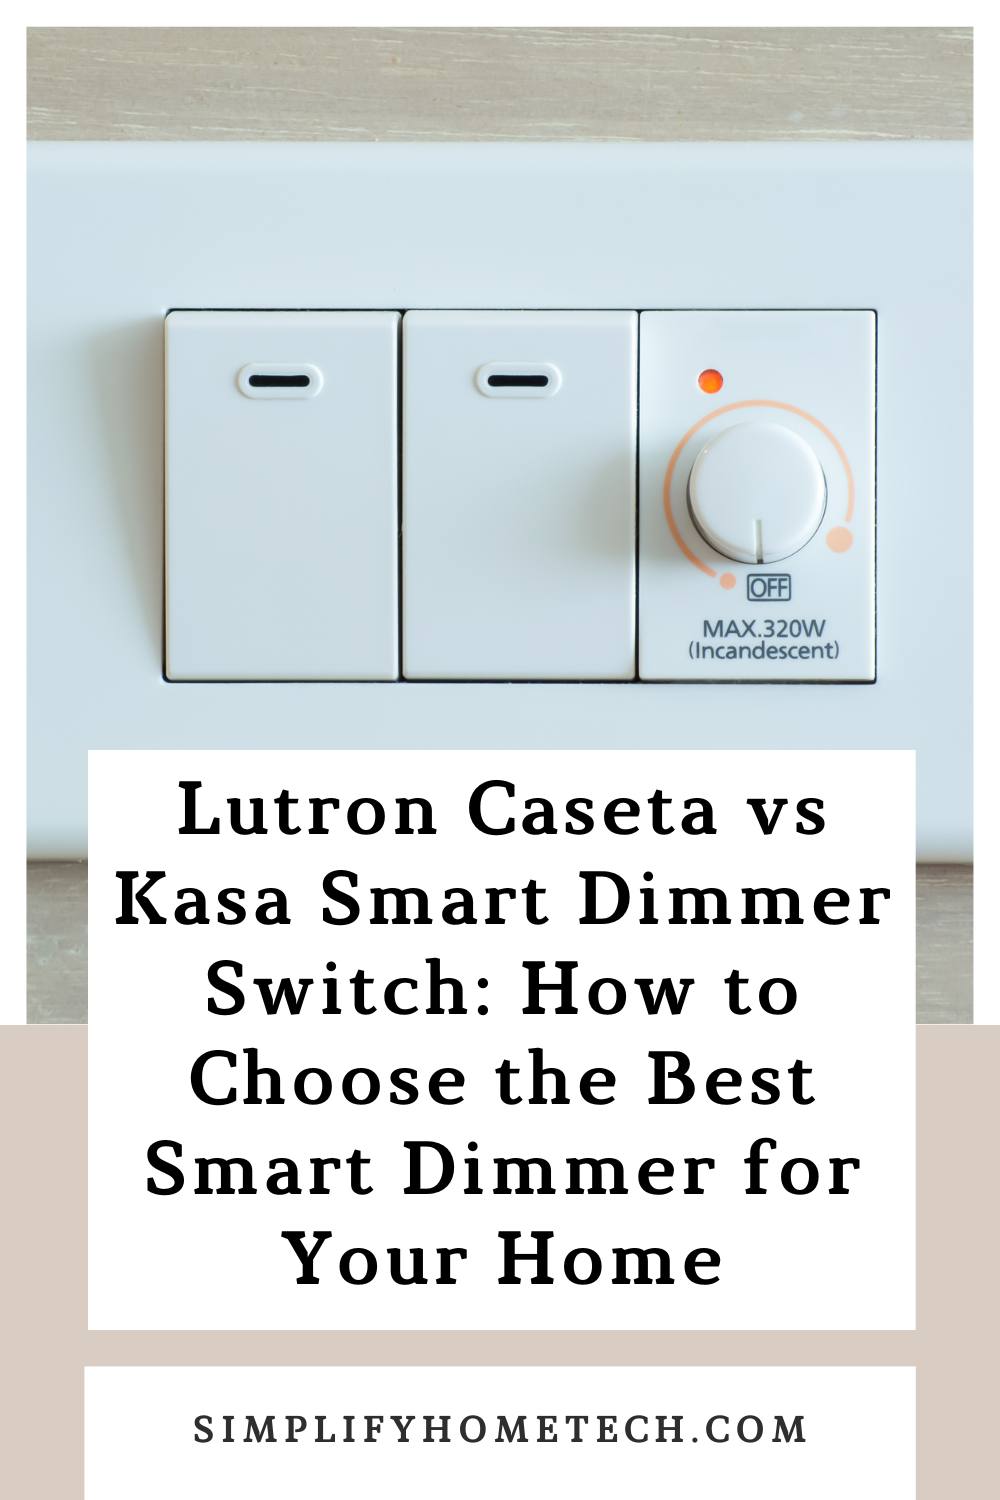 How to Choose the Best Smart Dimmer for Your Home